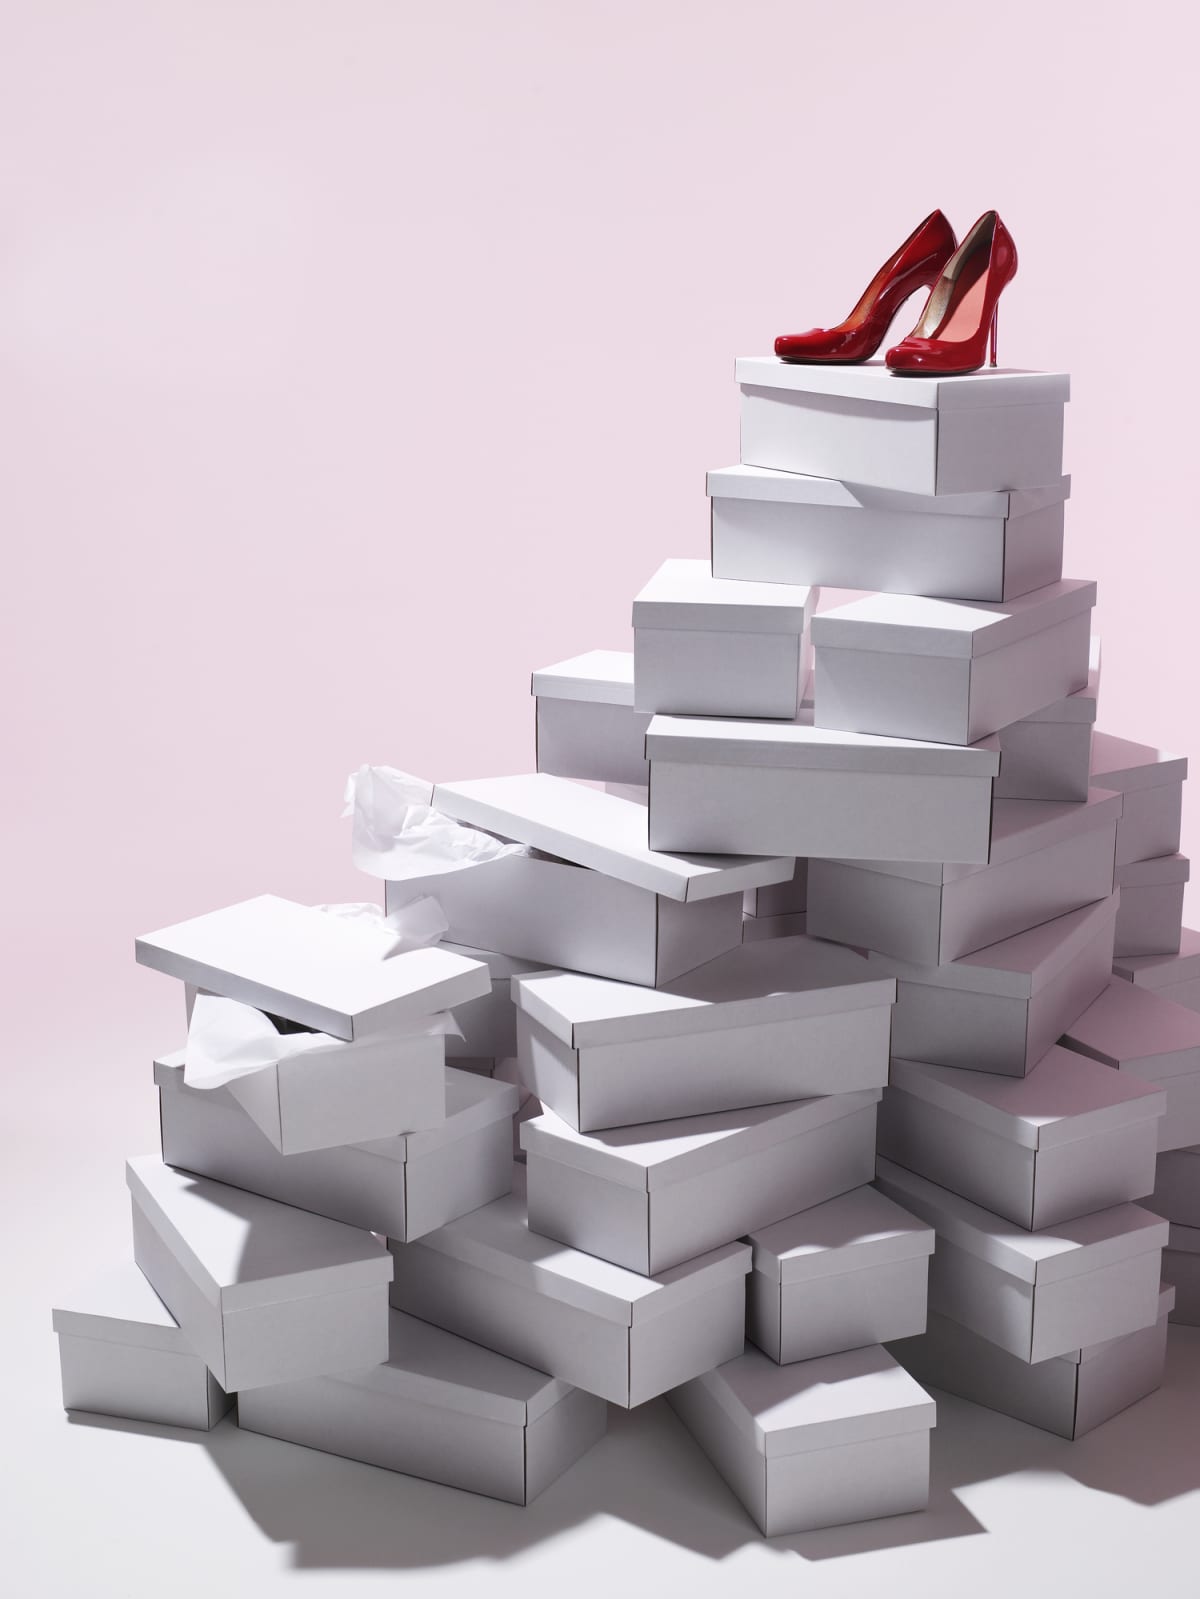 Red shoes on top of a pile of shoeboxes